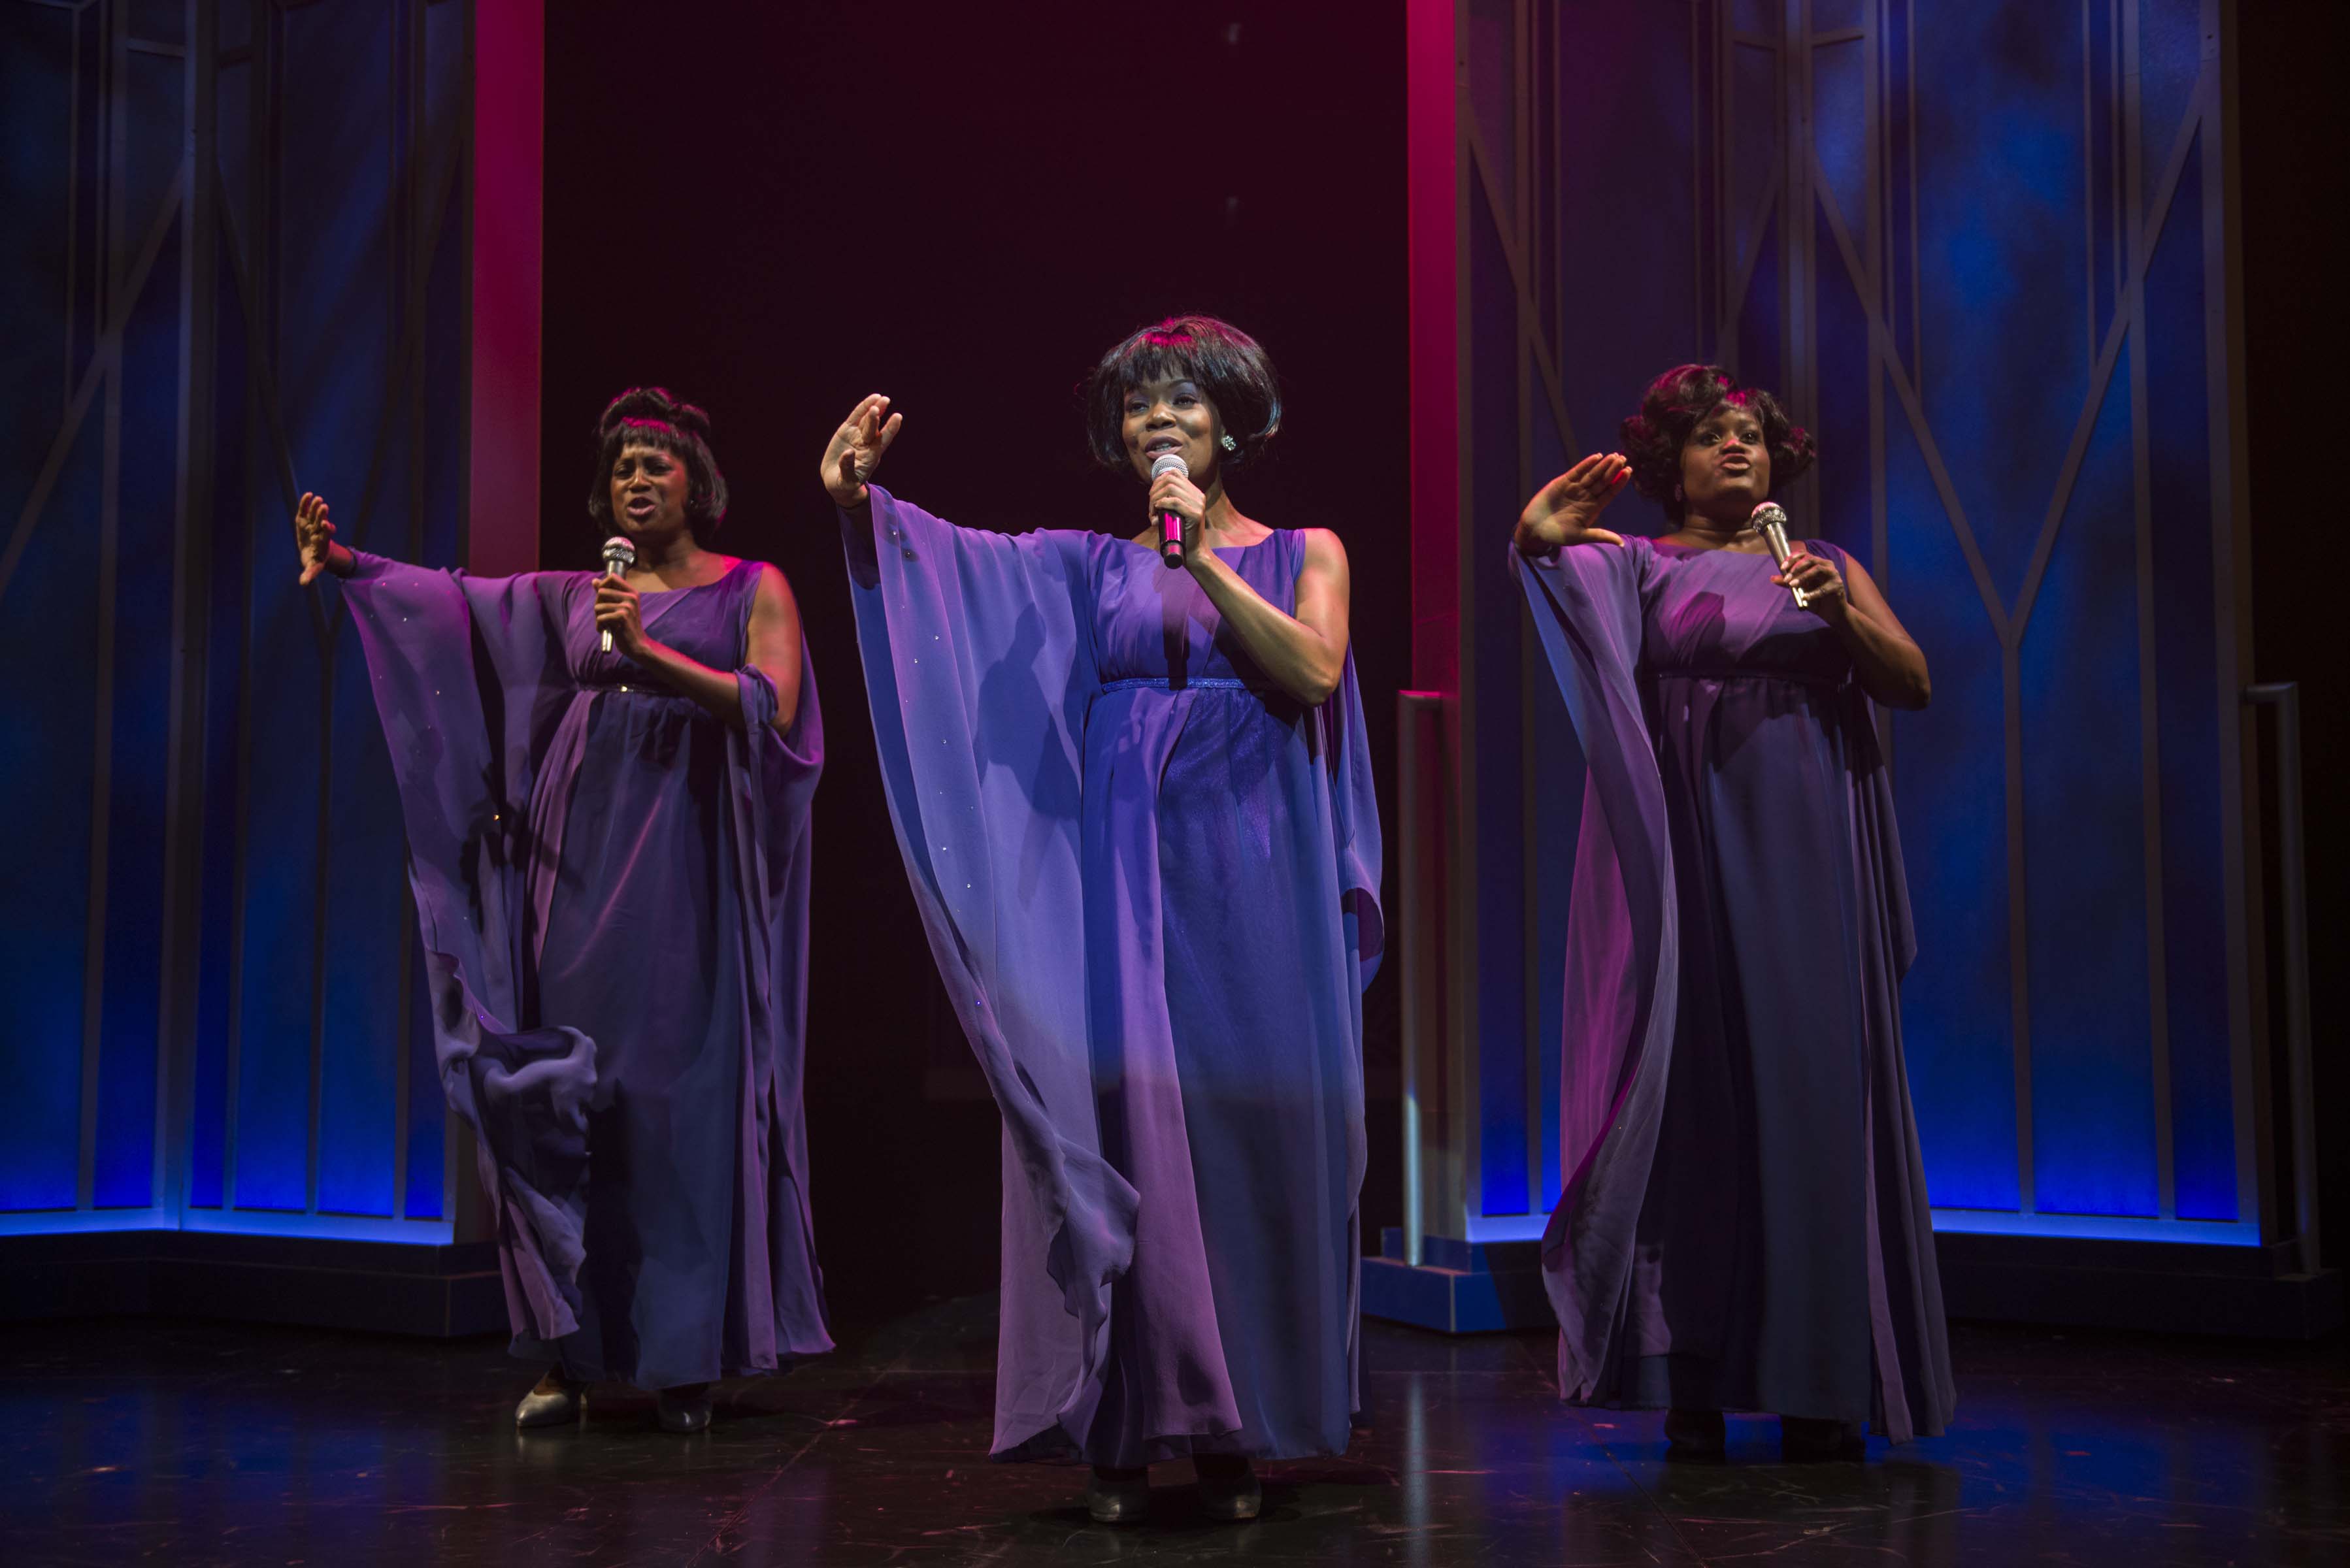 Milwaukee Rep Delivers An Electrifying DREAMGIRLS 1 Hey Chicago, Milwaukee is on fire this fall.  I encourage to you come feel the heat generated by the Milwaukee Repertory Theater’s much-anticipated season-opener, an electrifying production of the Tony Award-winning musical Dreamgirls.